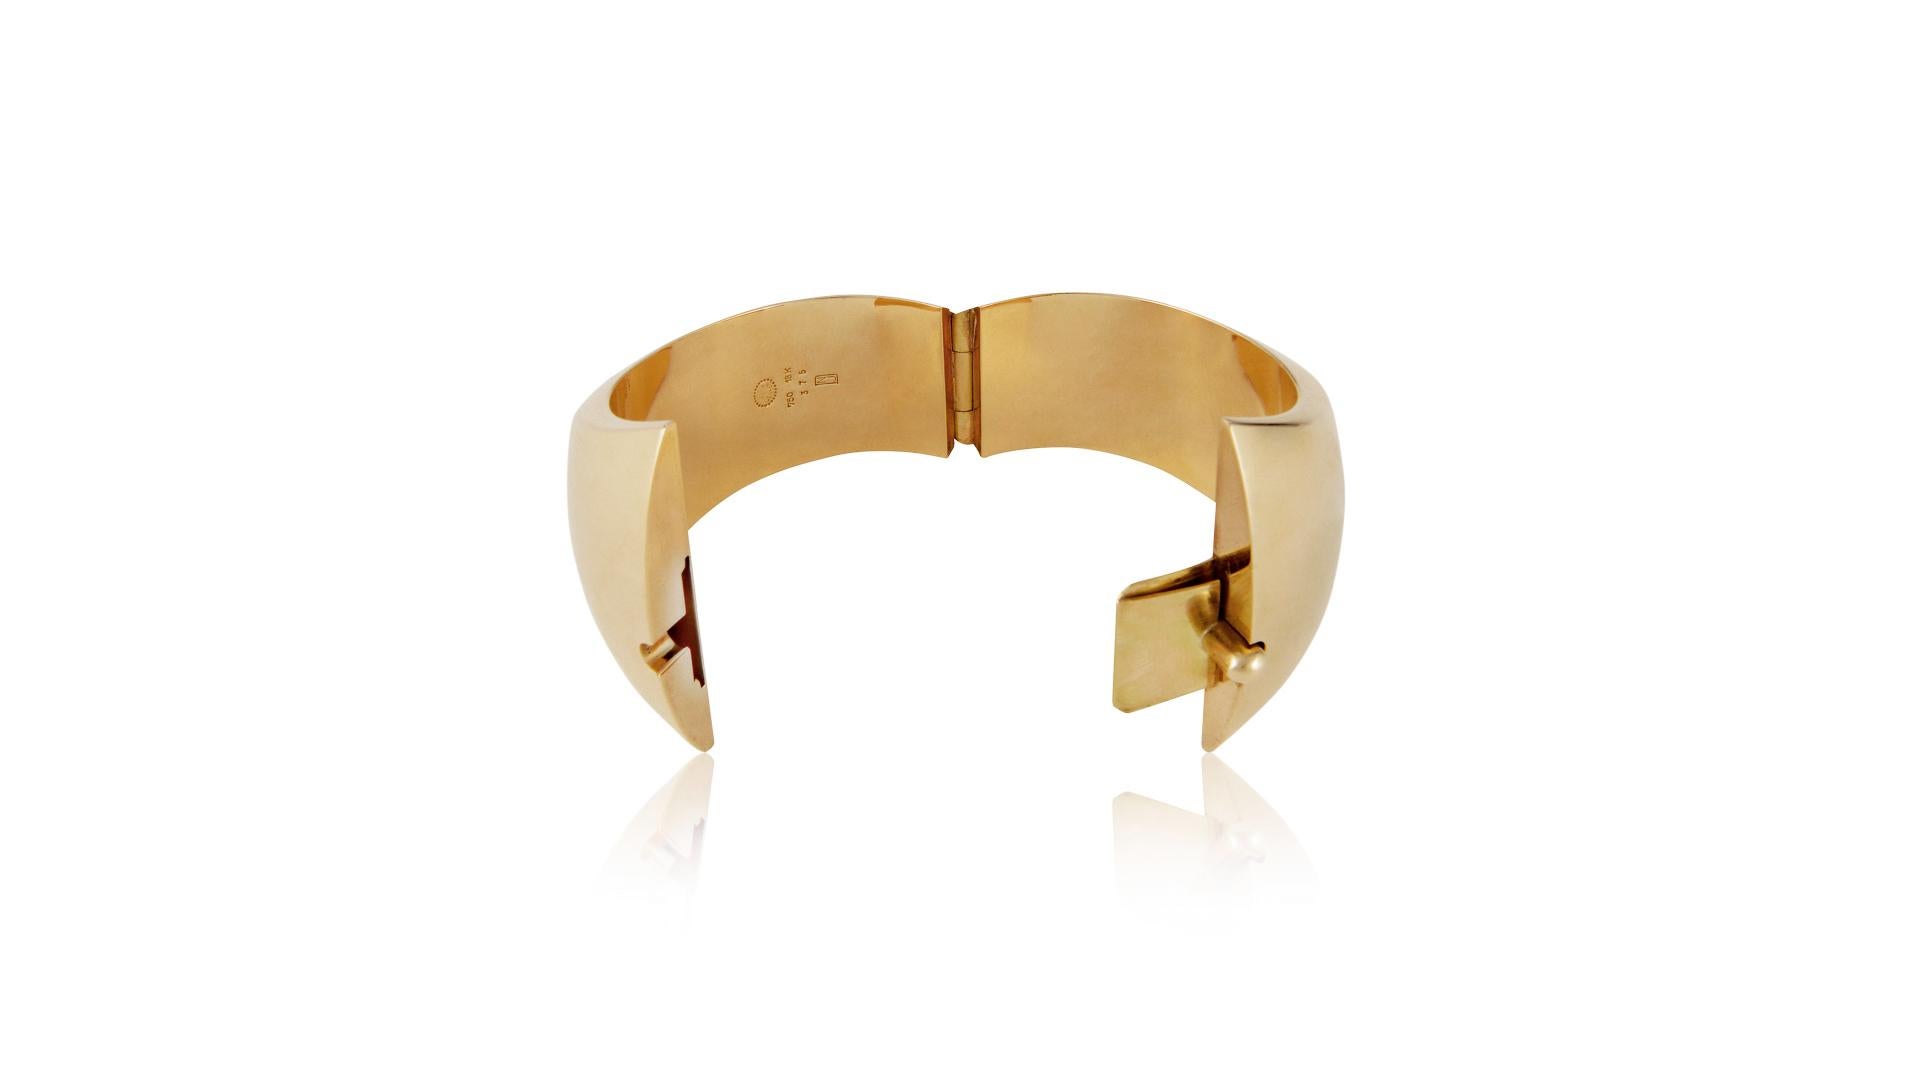 This is an extremely rare 18kt gold Georg Jensen hinged cuff in original box, design #375 by Nanna and Jorgen Ditzel from circa 1960. Extremely rare to see this design in gold.
This piece has an amazing opening mechanism, where the little gold